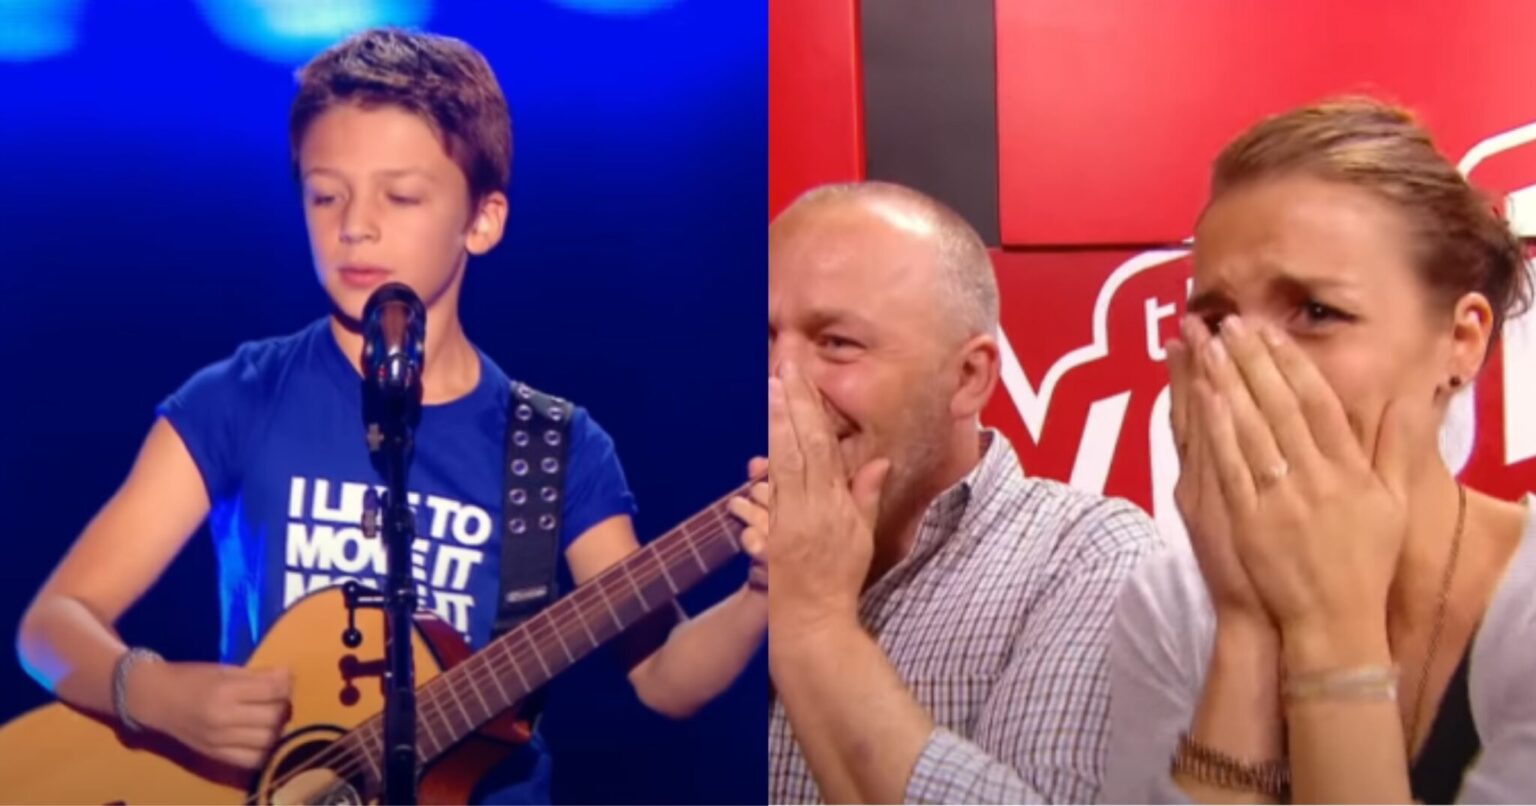 “Ten-year-old Boy Captivates Every Coach on ‘The Voice’ with His Nostalgic Cover of Bob Dylan’s 1973 Hit ‘Knockin’ on Heaven’s Door'”